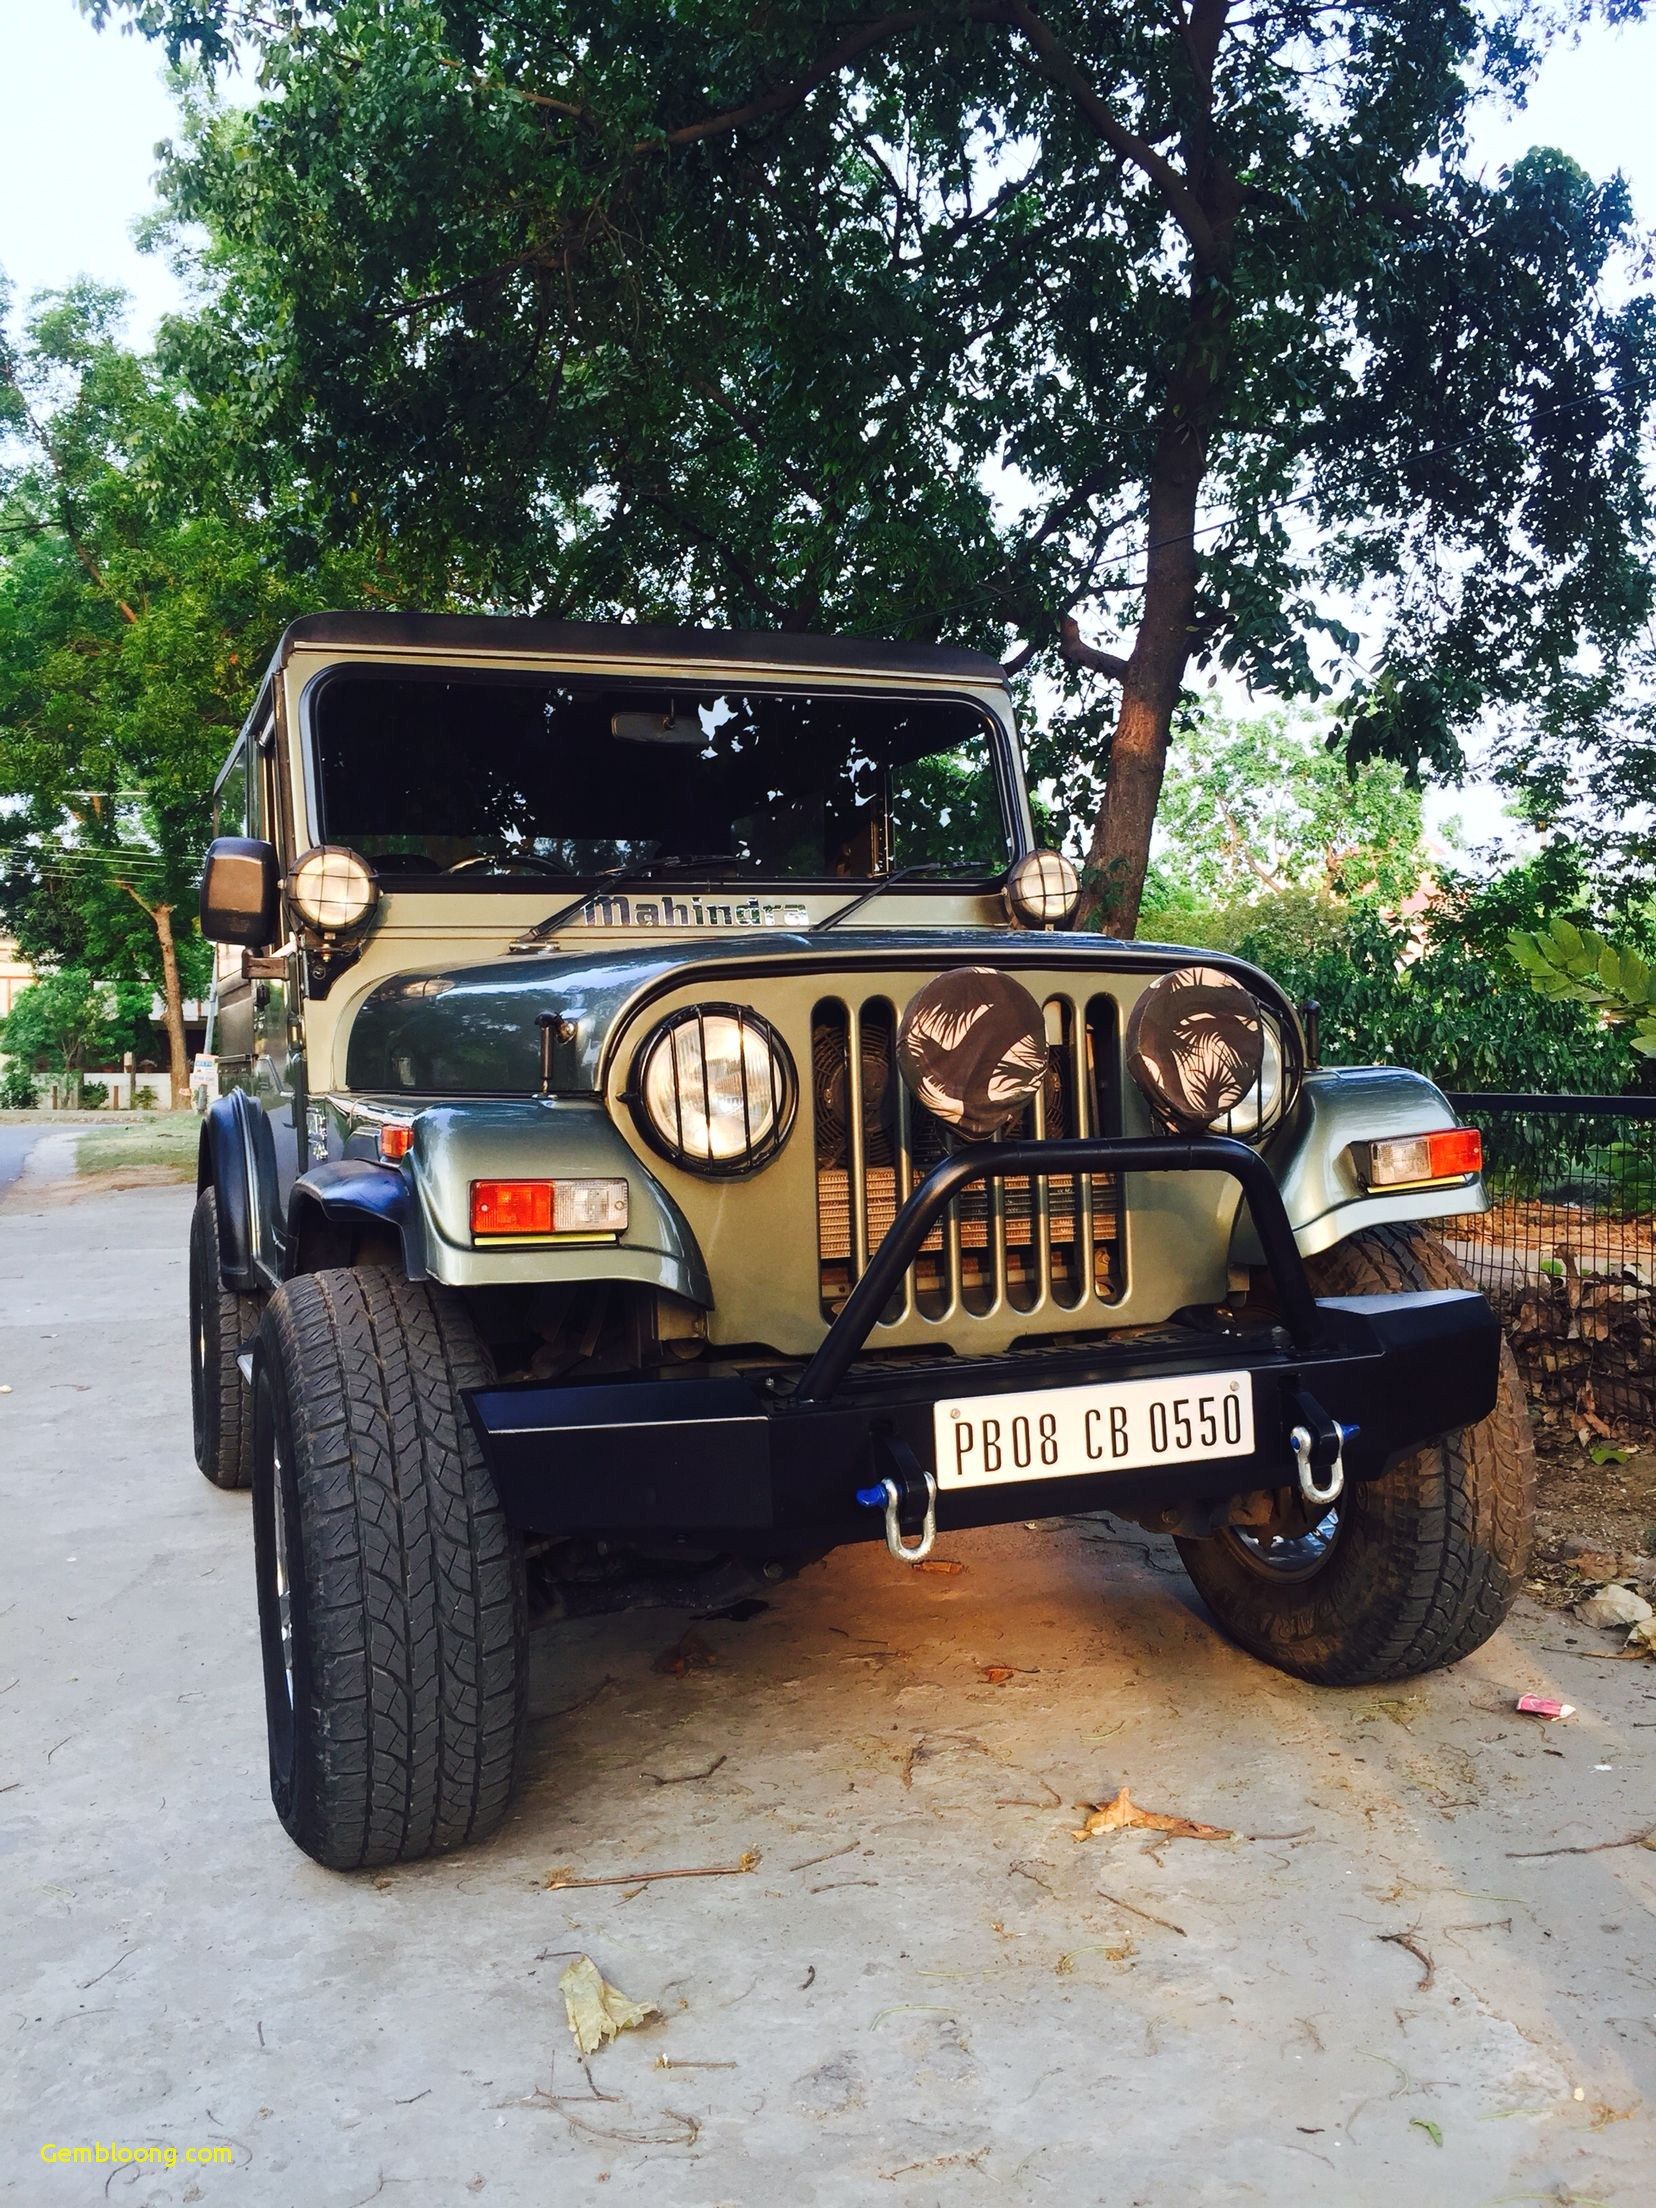 Gallery Jeep Wallpaper For iPhone Awesome Download Thar